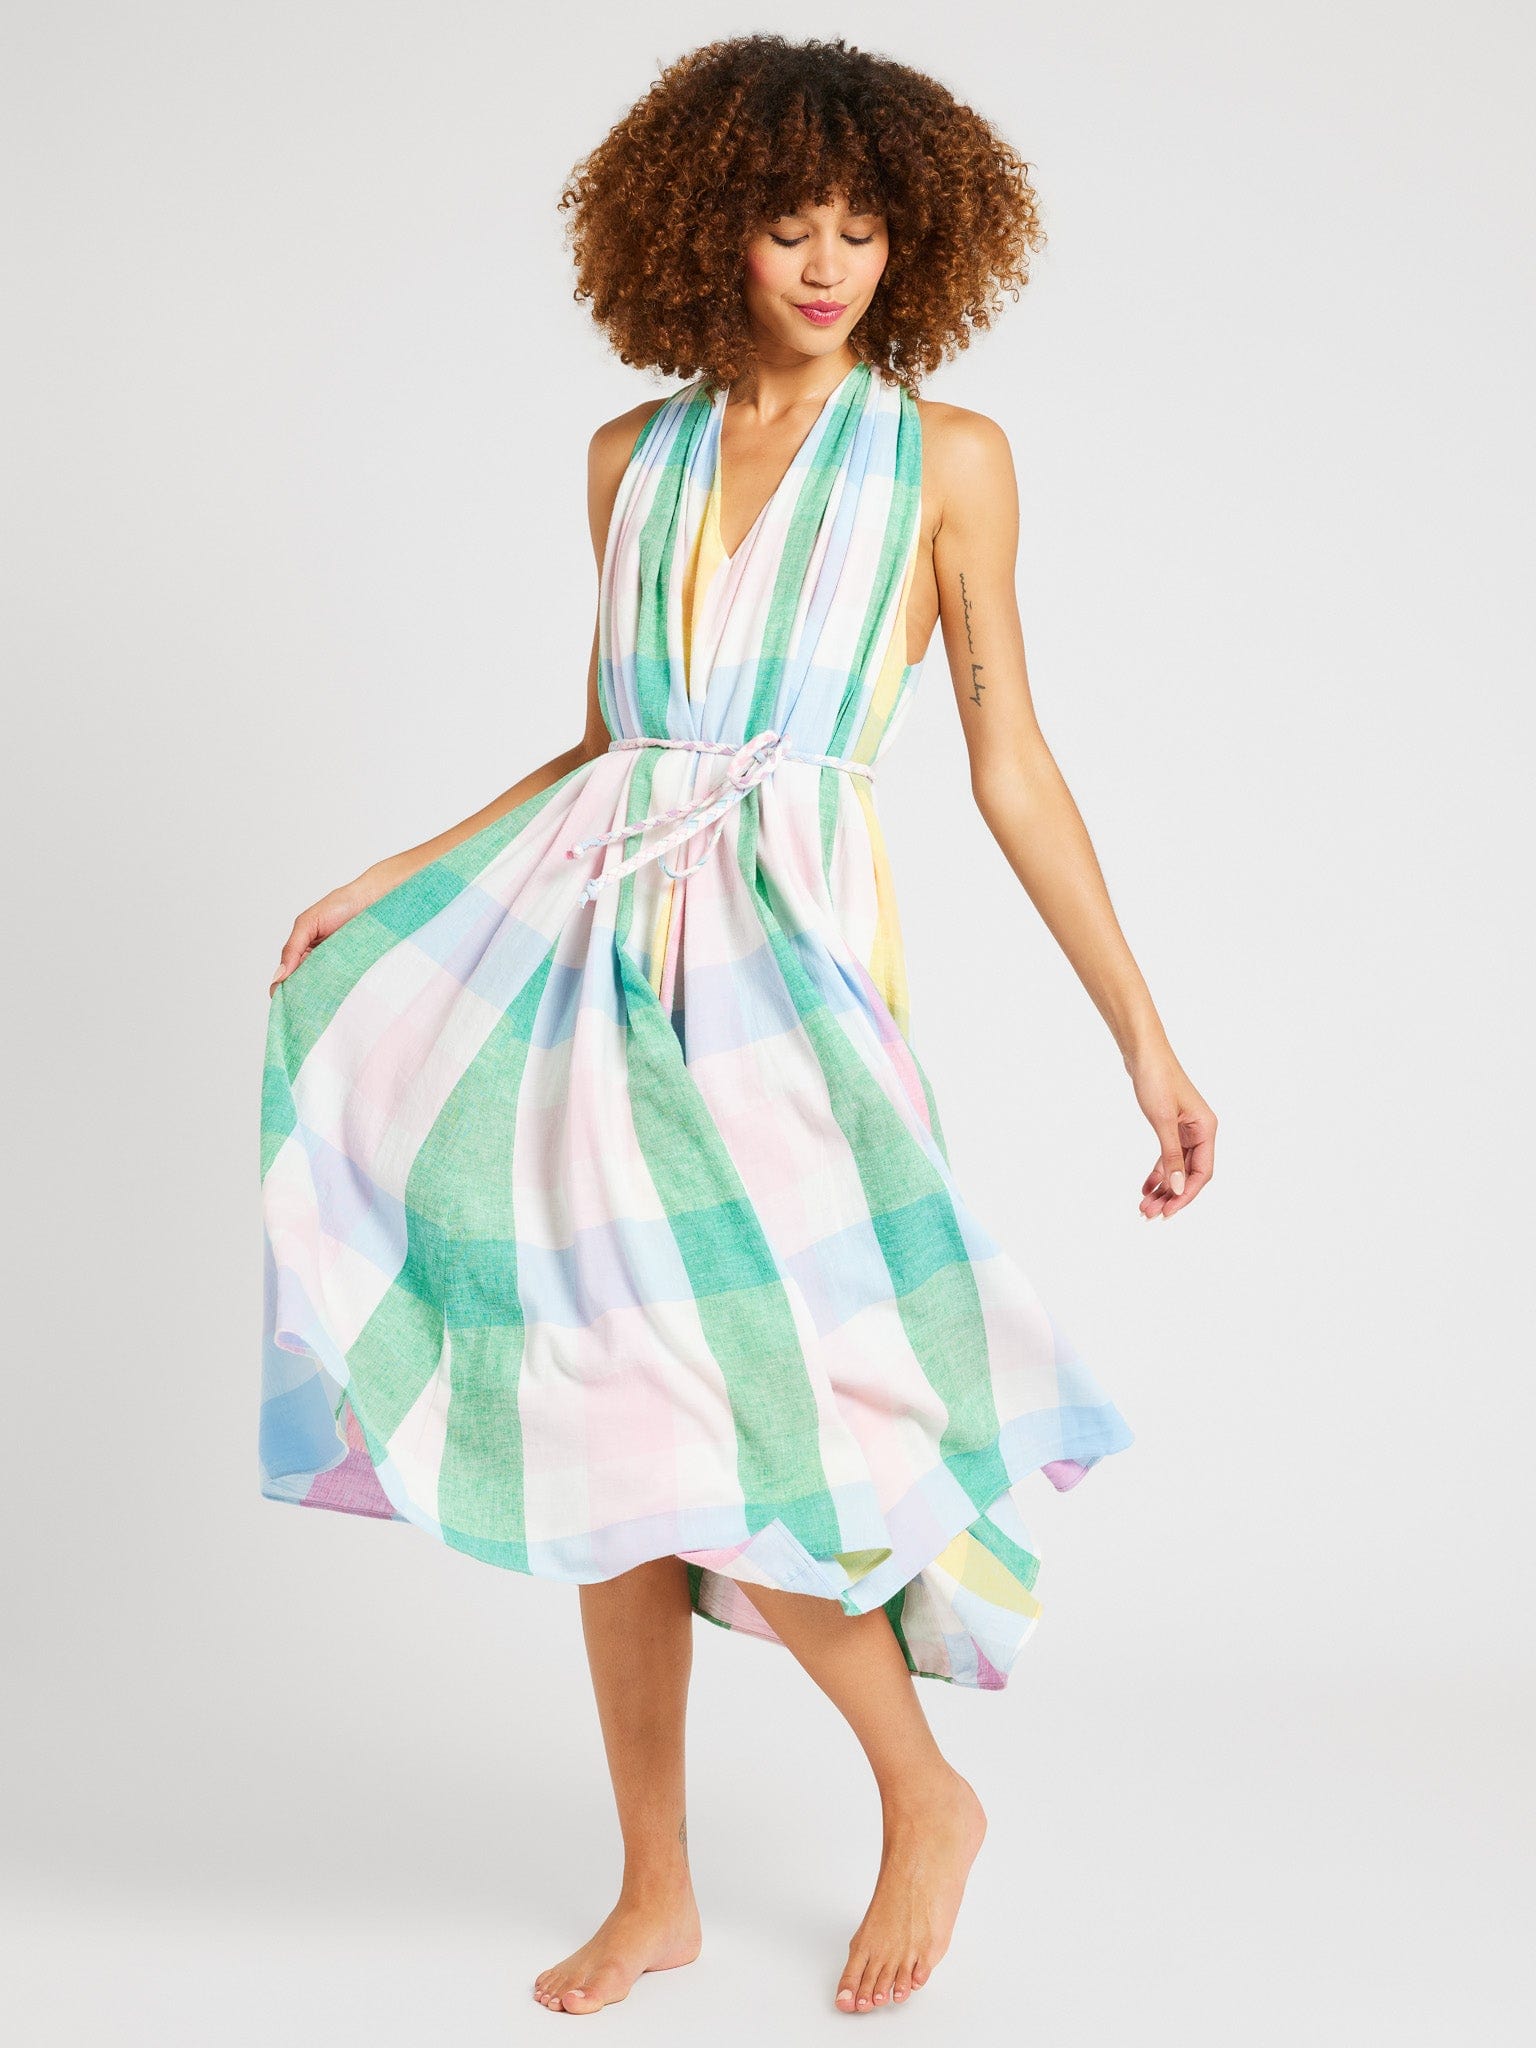 MILLE Clothing Marilyn Dress in Pastel Plaid